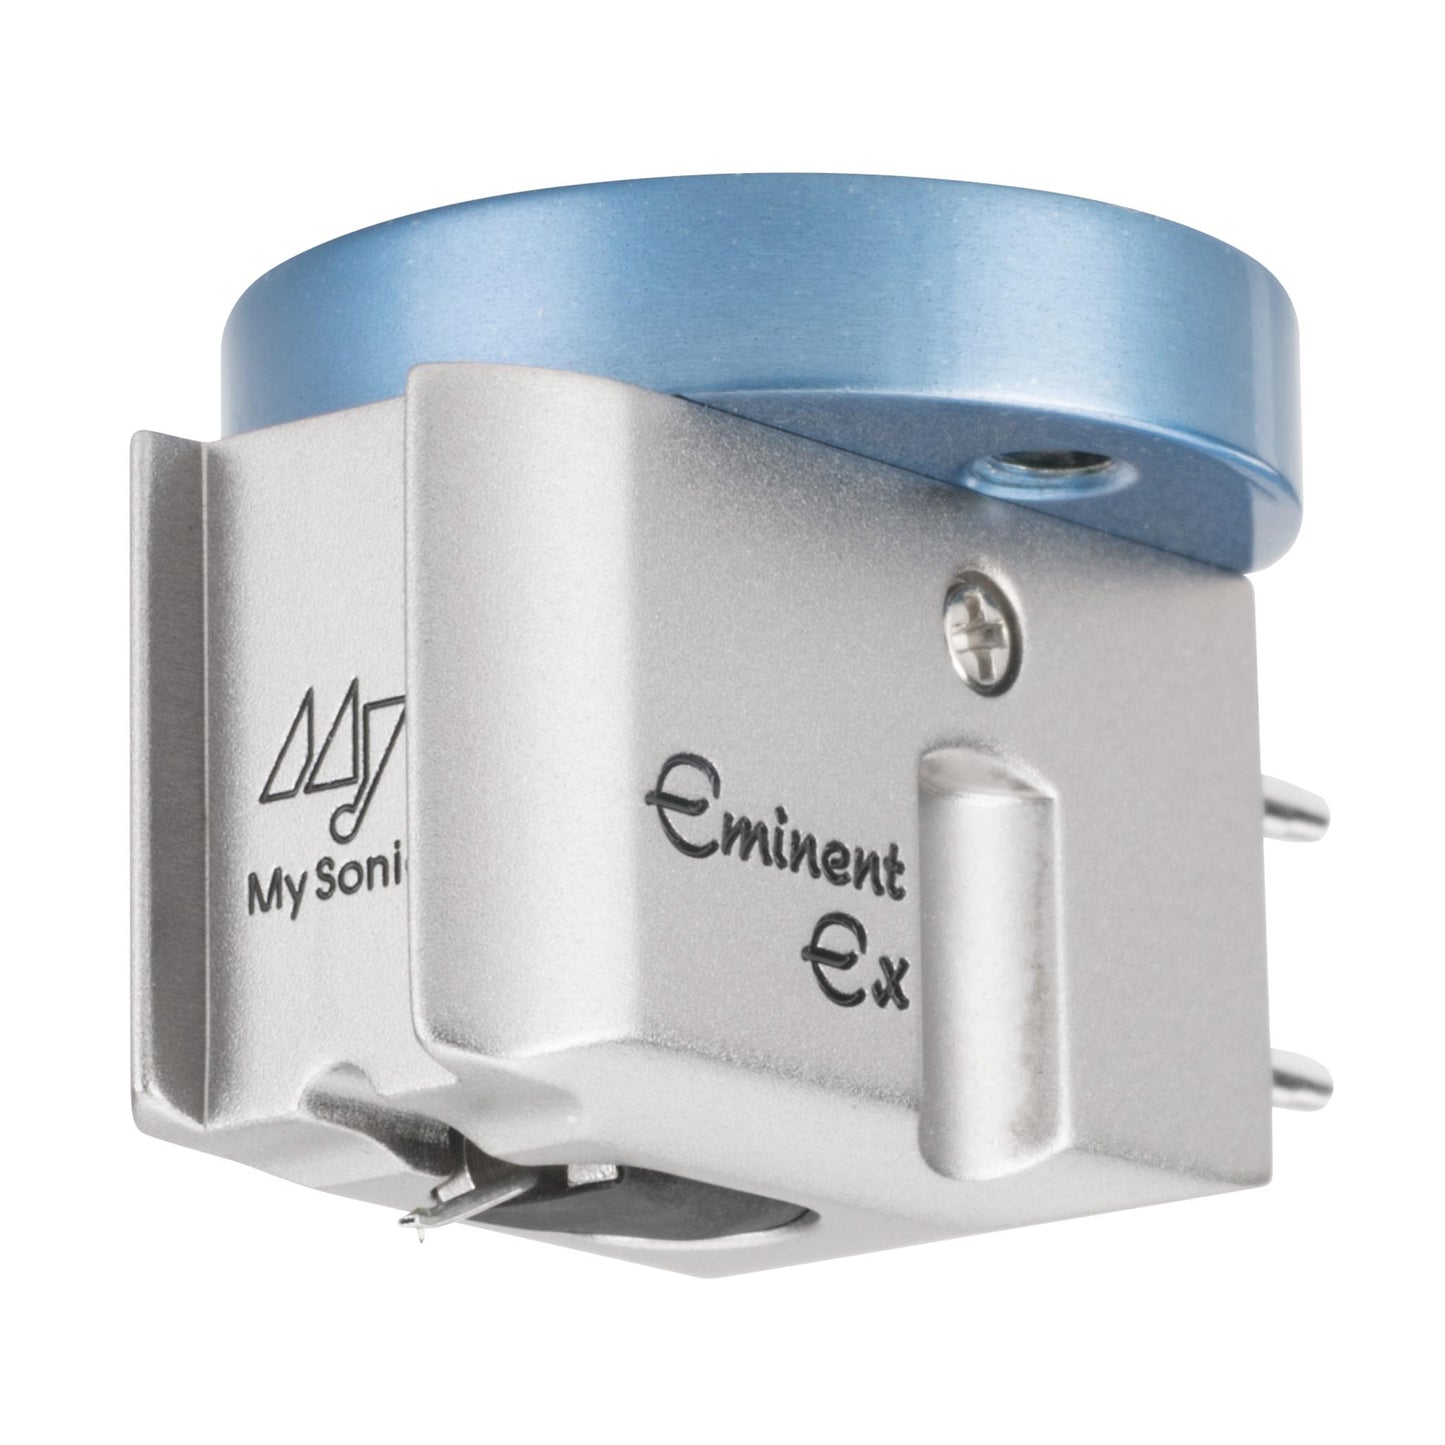 My Sonic Lab Eminent EX Moving Coil Cartridge